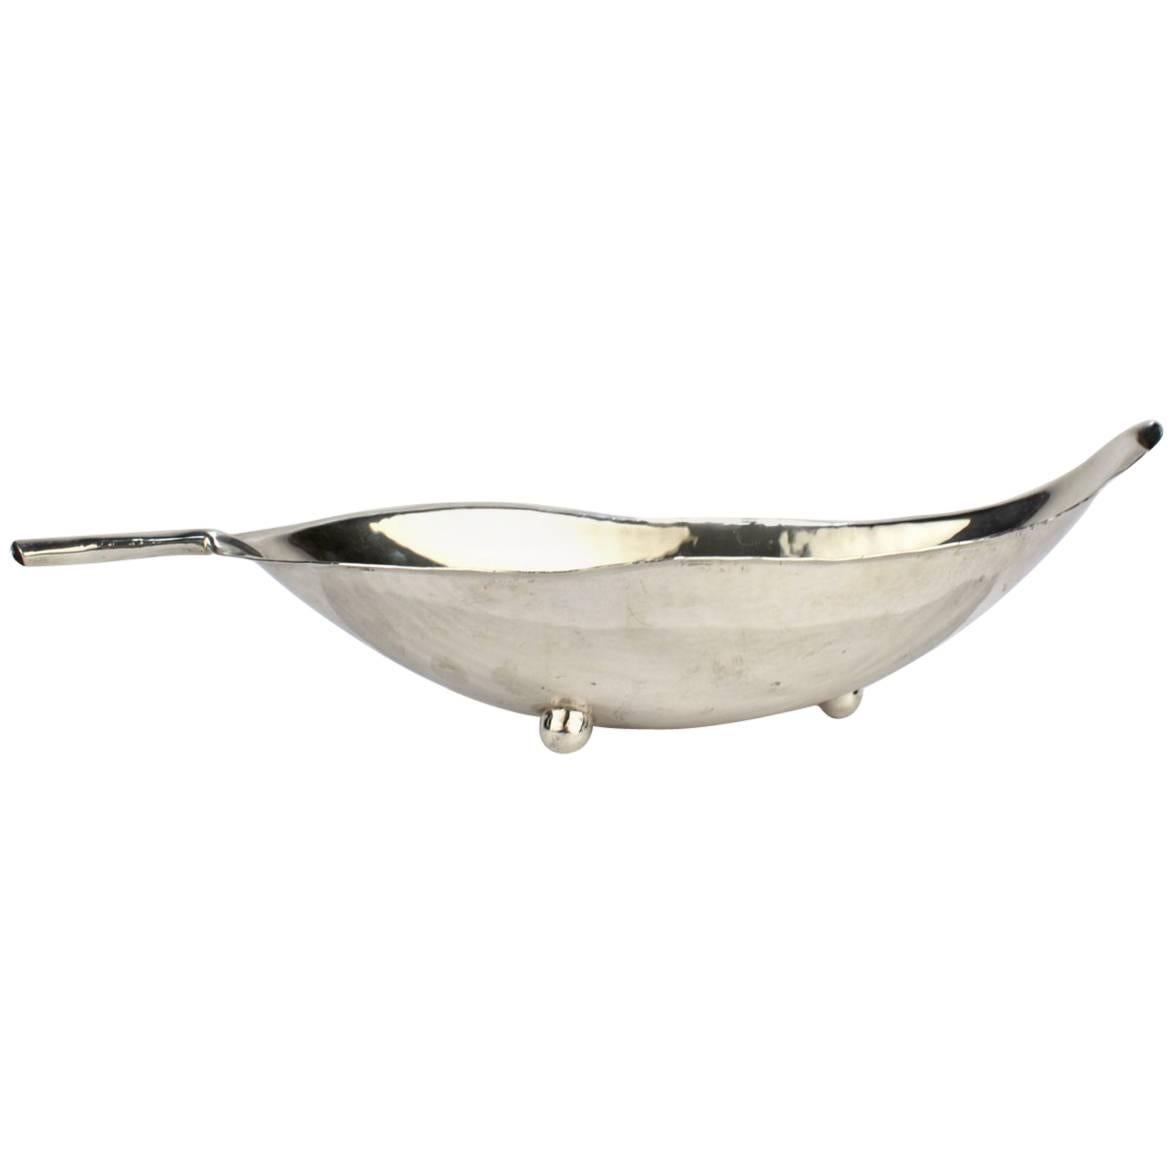 Large Mid-Century Sterling Silver Leaf Bowl by Alfredo Sciarrotta for Cartier